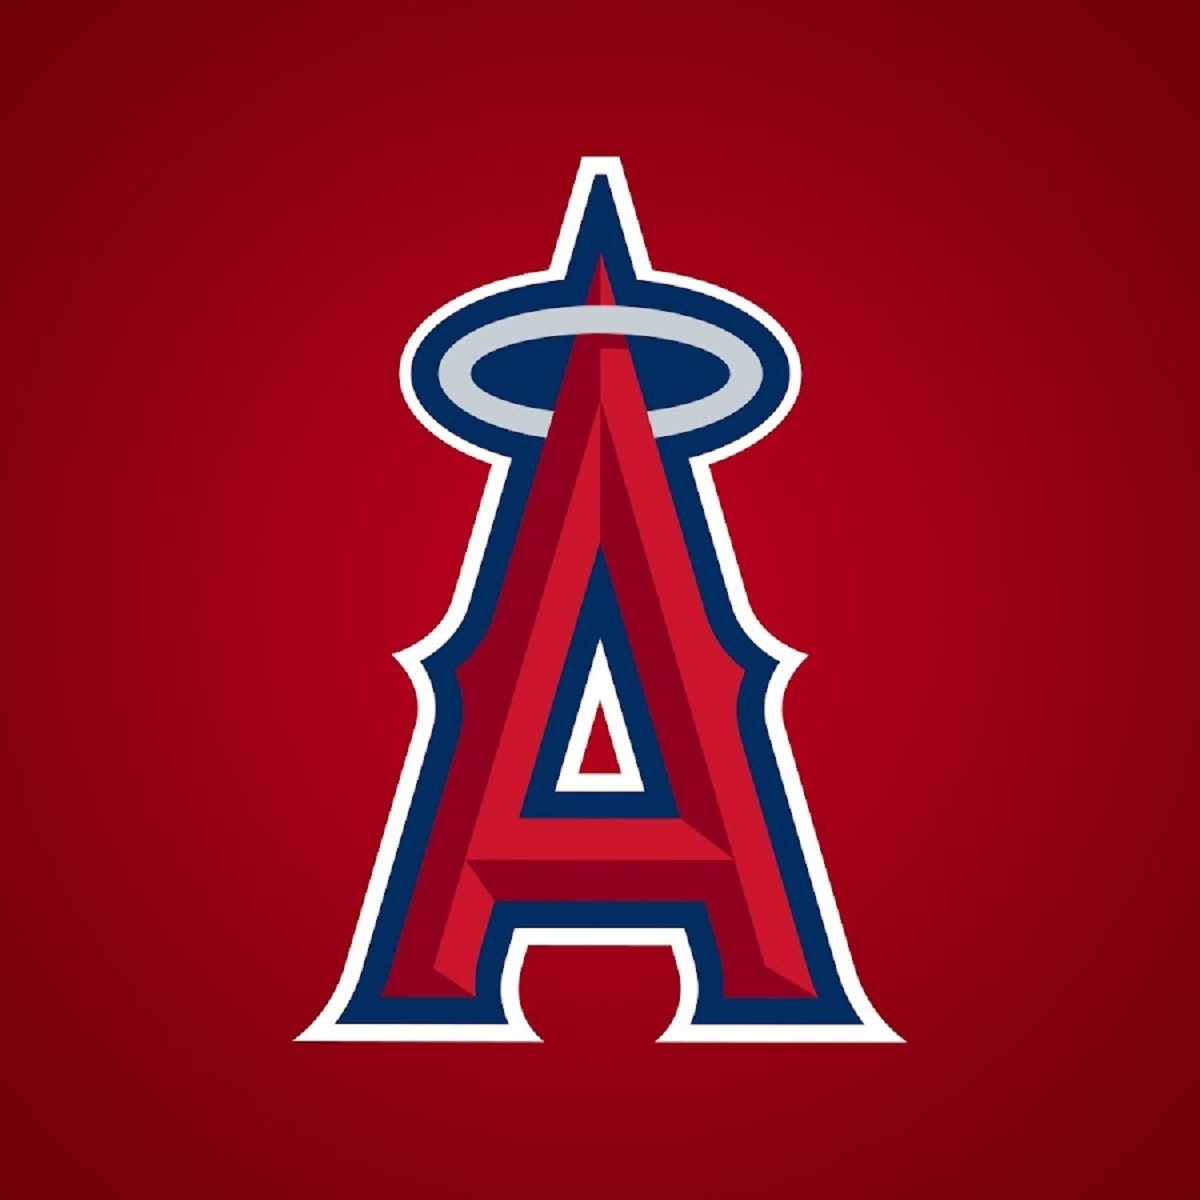 'The Los Angeles Angels' is actually 'The the angels angels'.